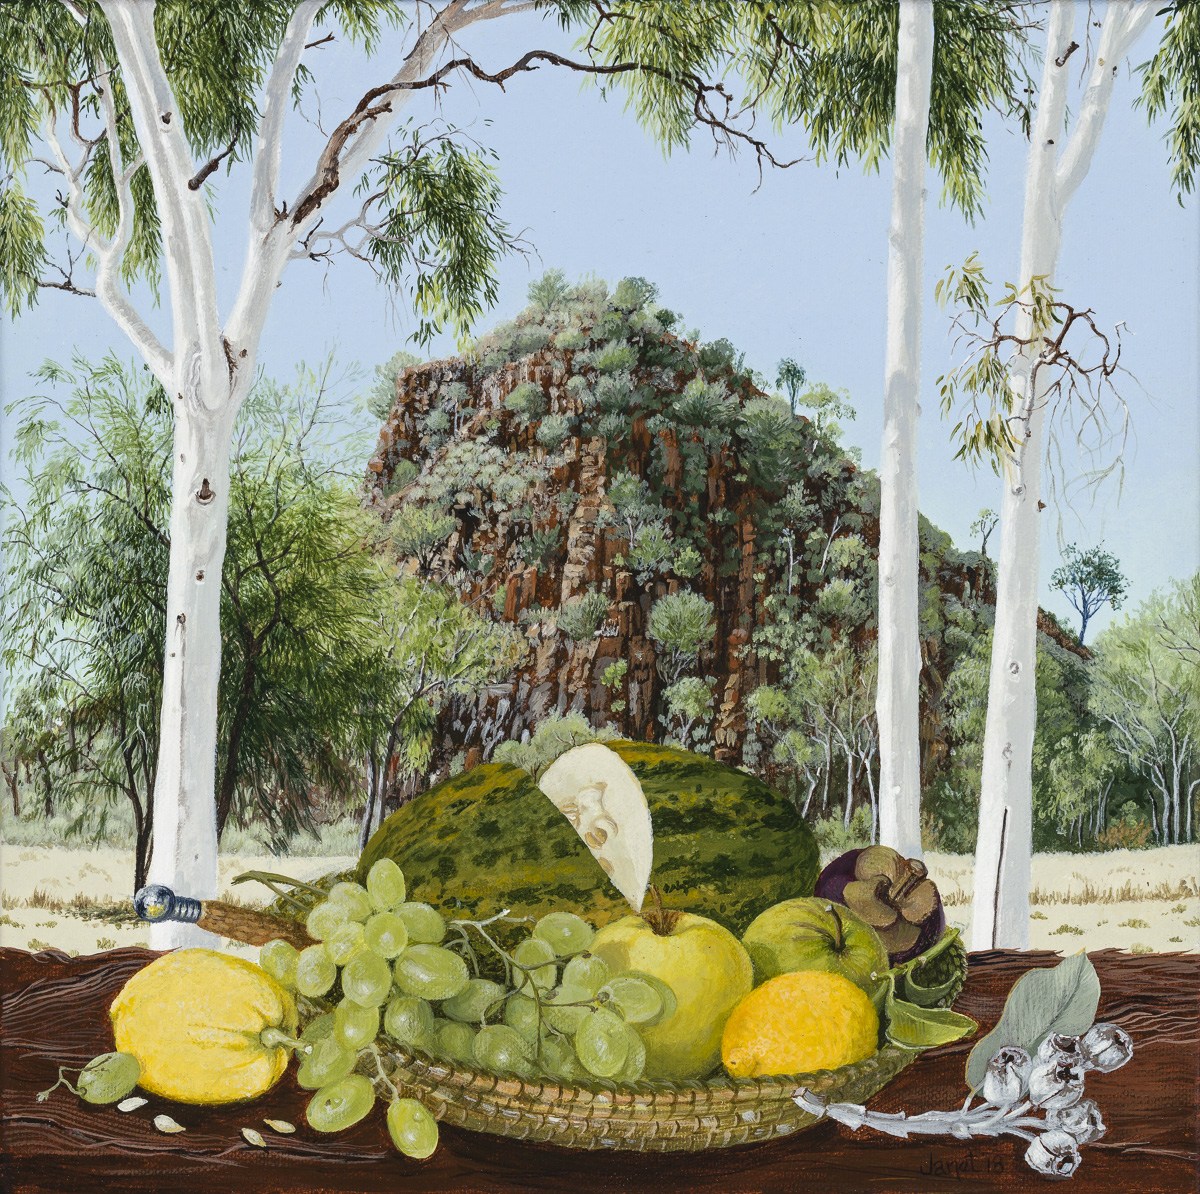 Still Life with Fruit, at 'Black Man Waiting', Alice Springs.30x30cm. synthetic polymer on canvas. Janet Green 2018